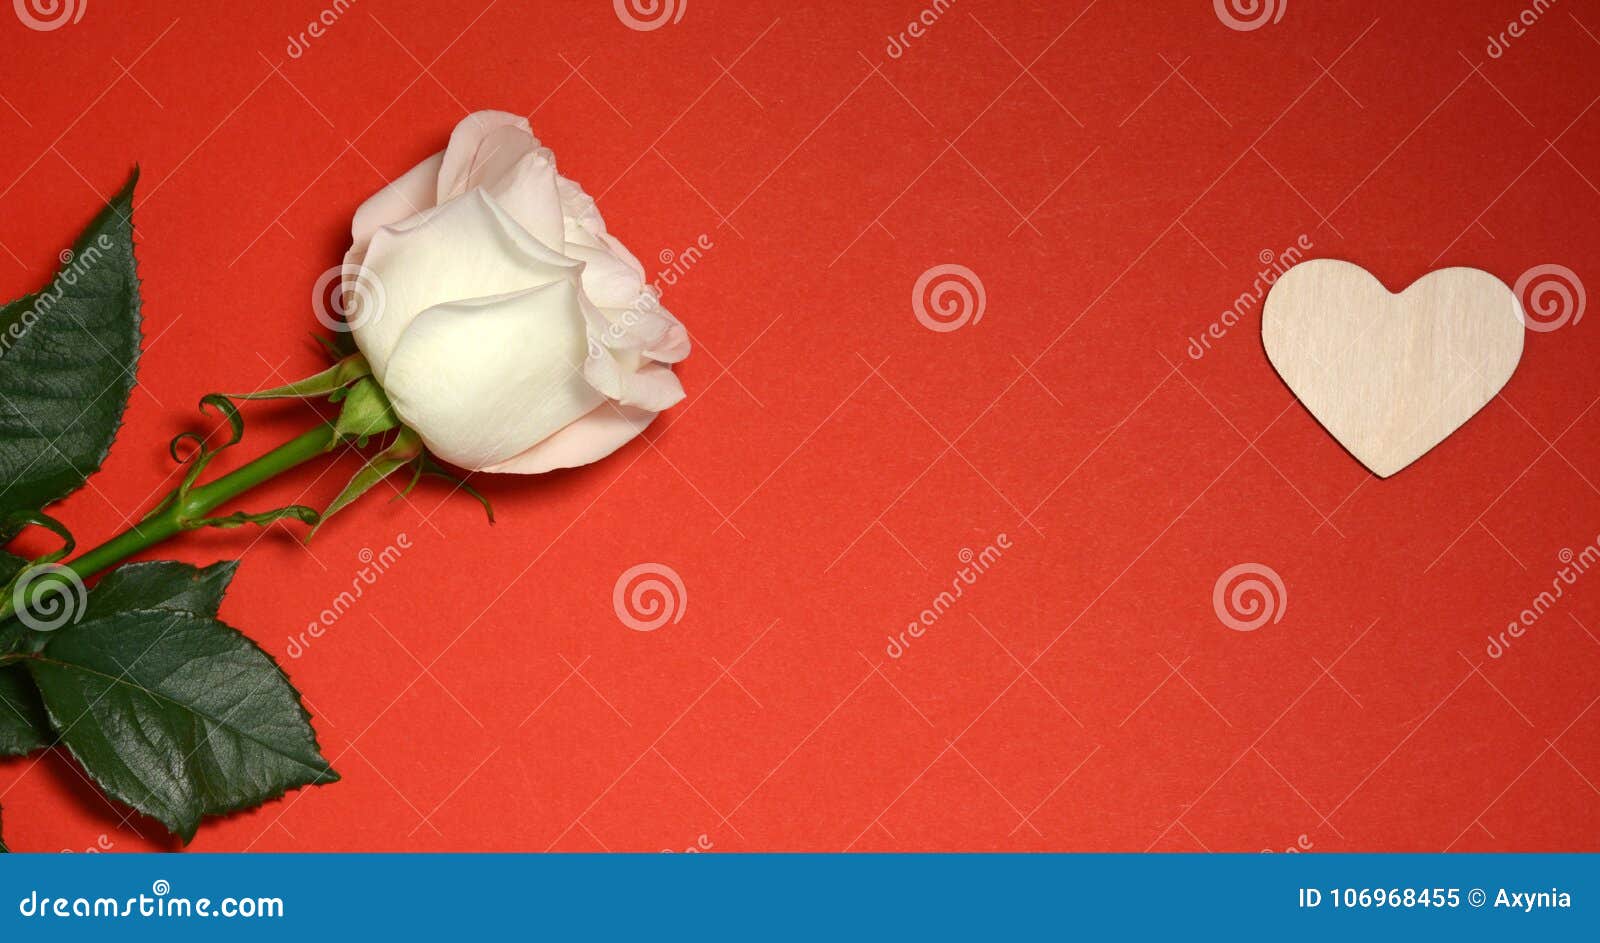 White Rose and Heart on Red Background Stock Image - Image of card ...